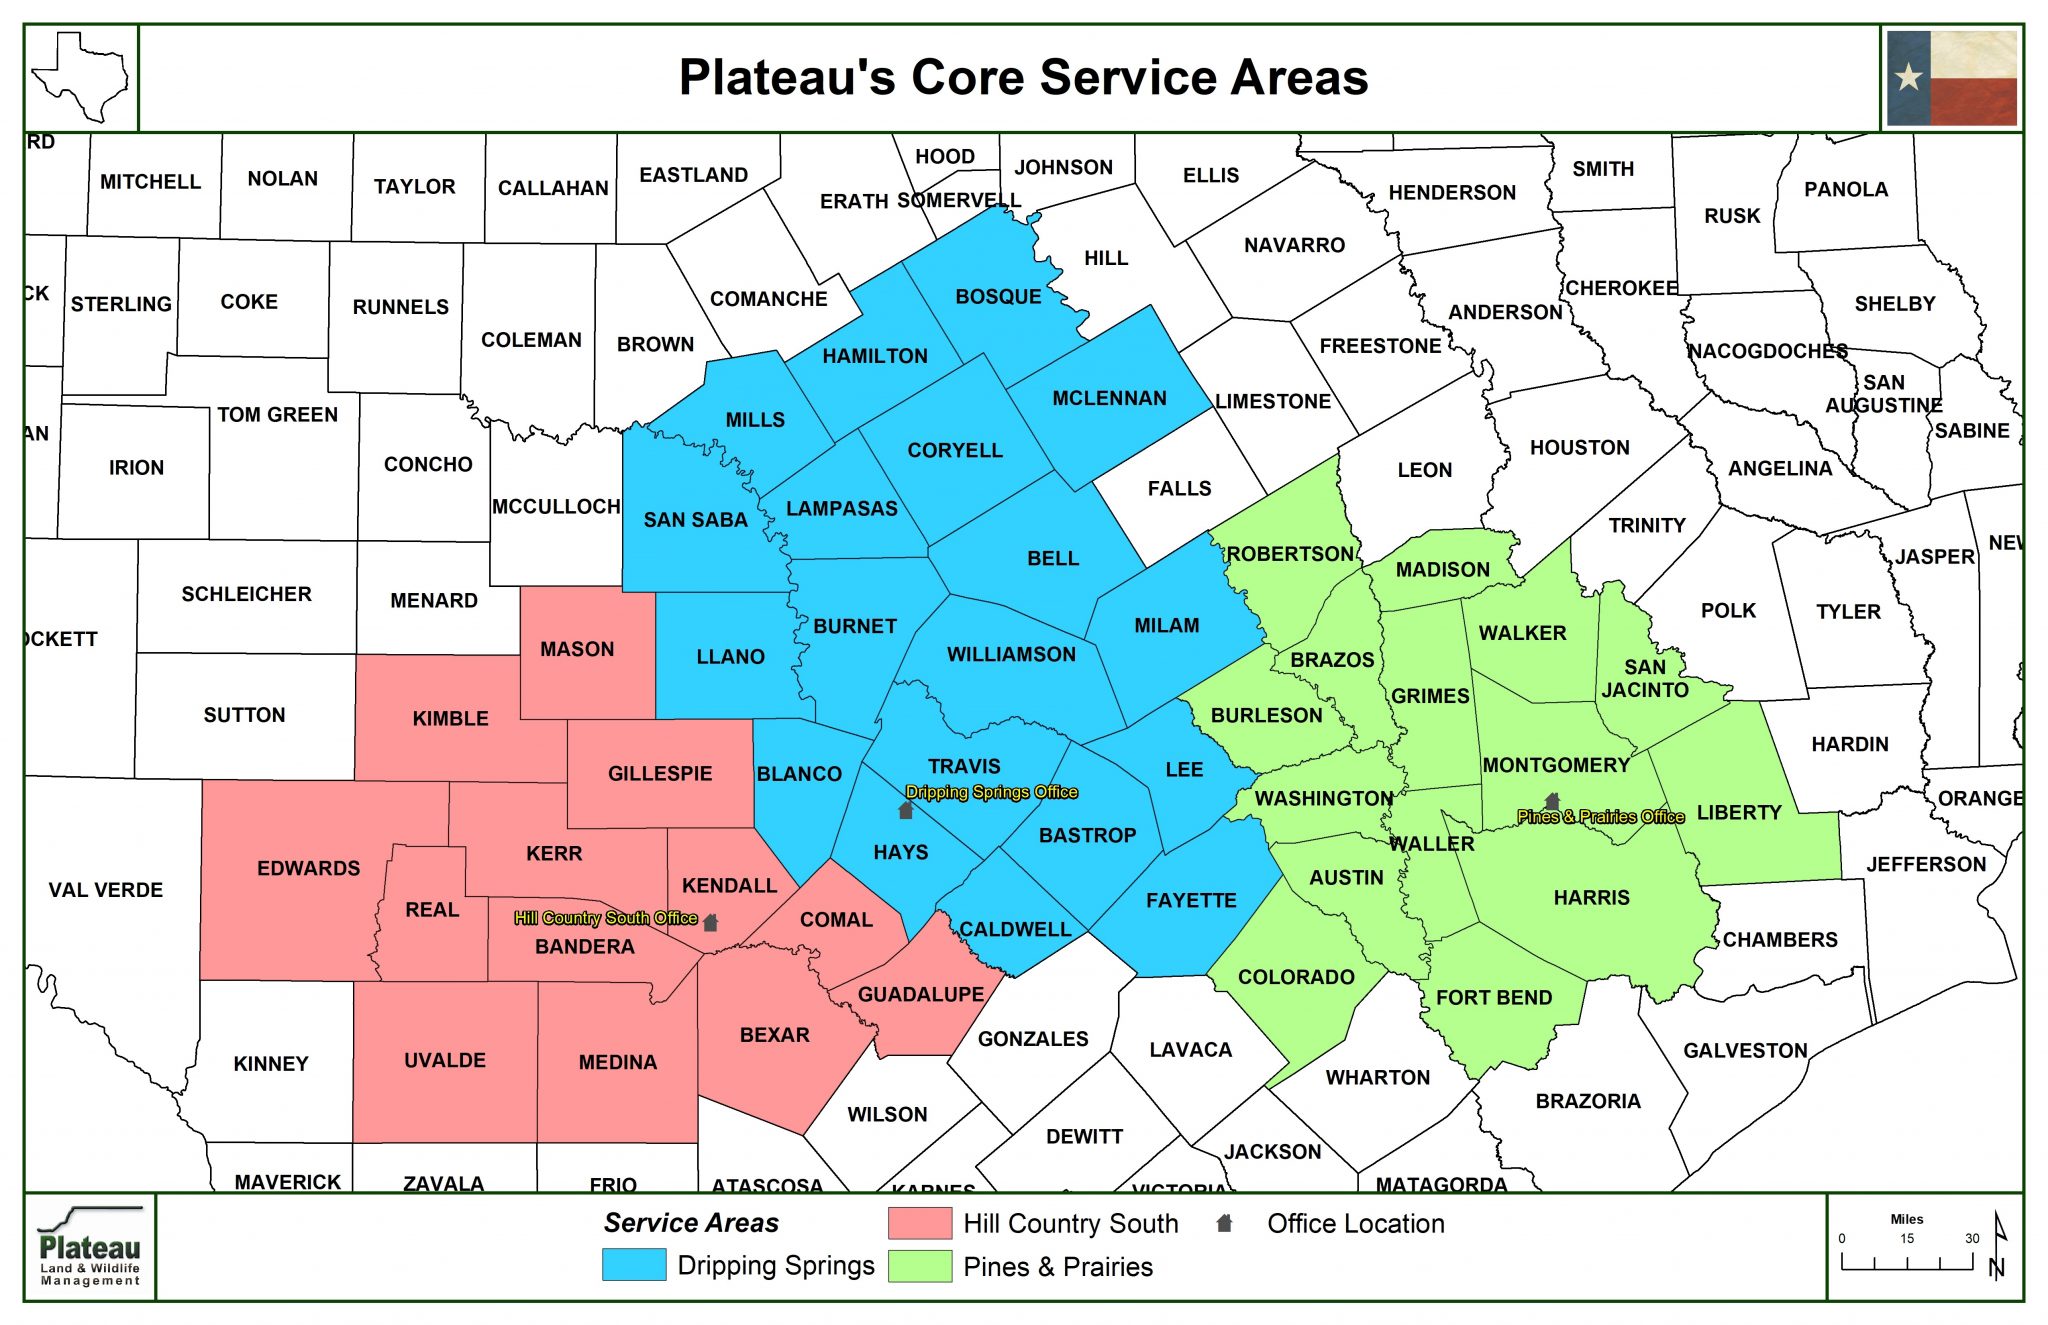 Plateaus Core Service Areas 